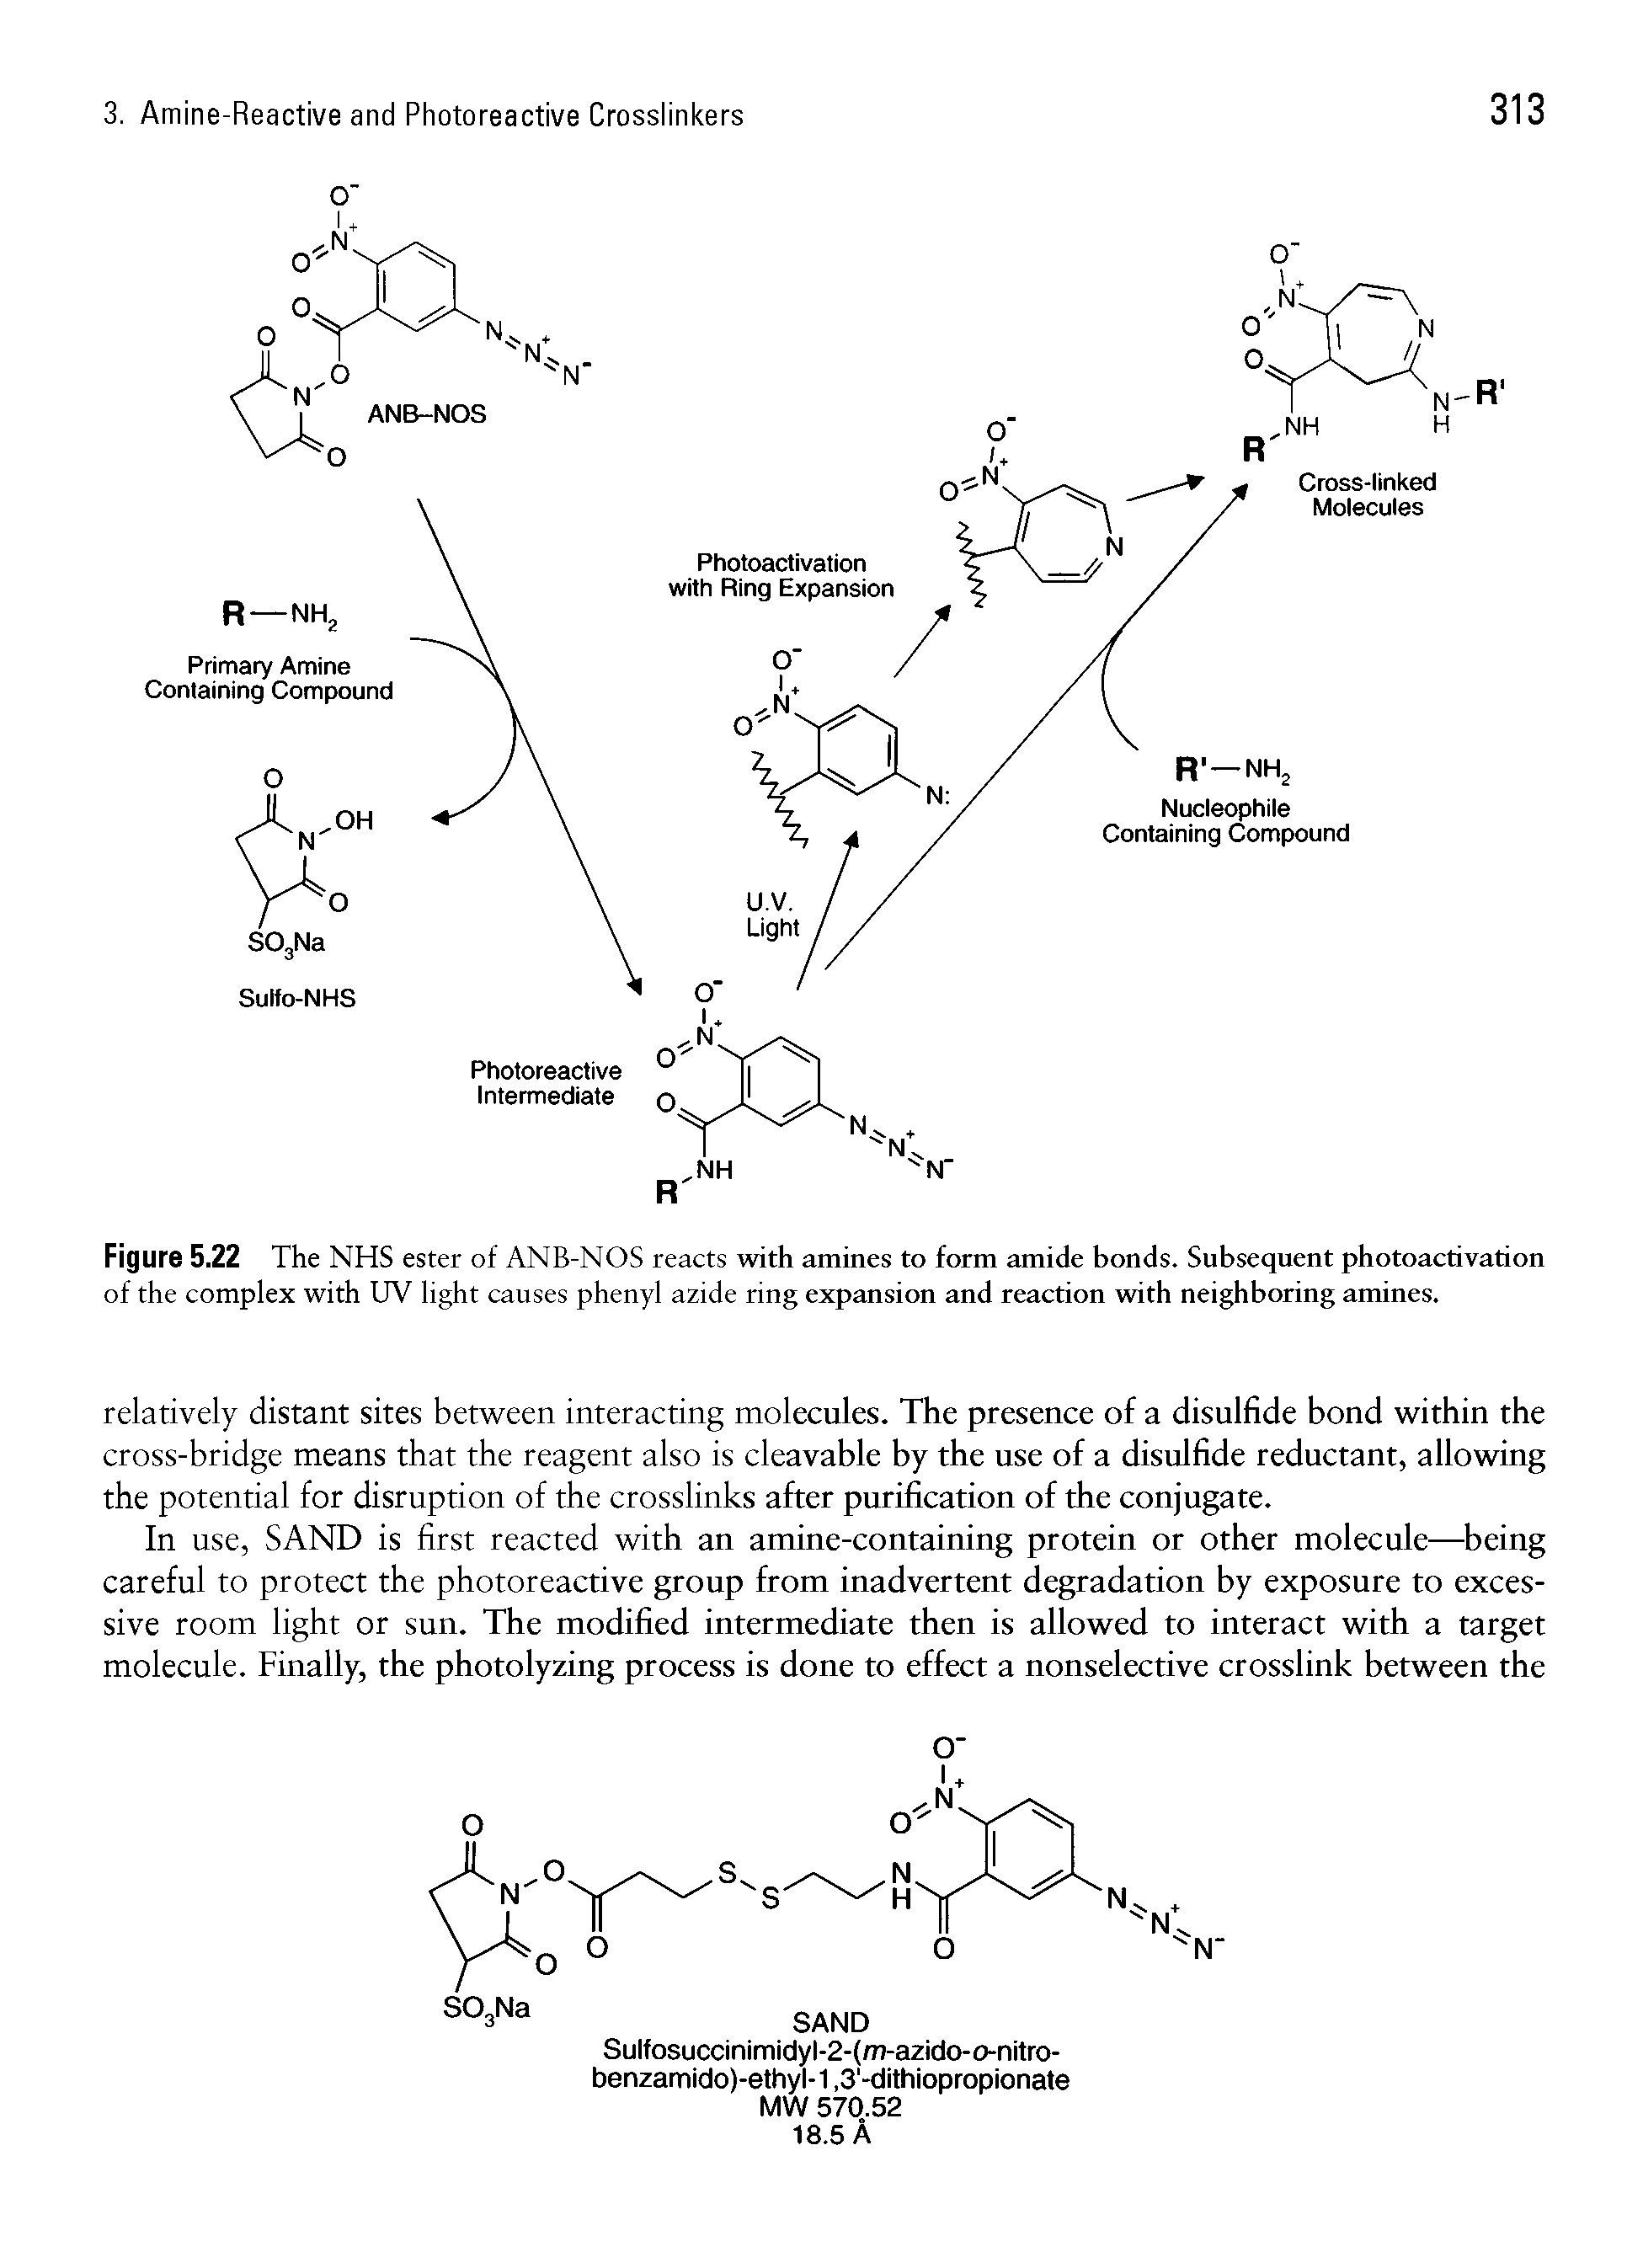 Figure 5.22 The NHS ester of ANB-NOS reacts with amines to form amide bonds. Subsequent photoactivation of the complex with UV light causes phenyl azide ring expansion and reaction with neighboring amines.